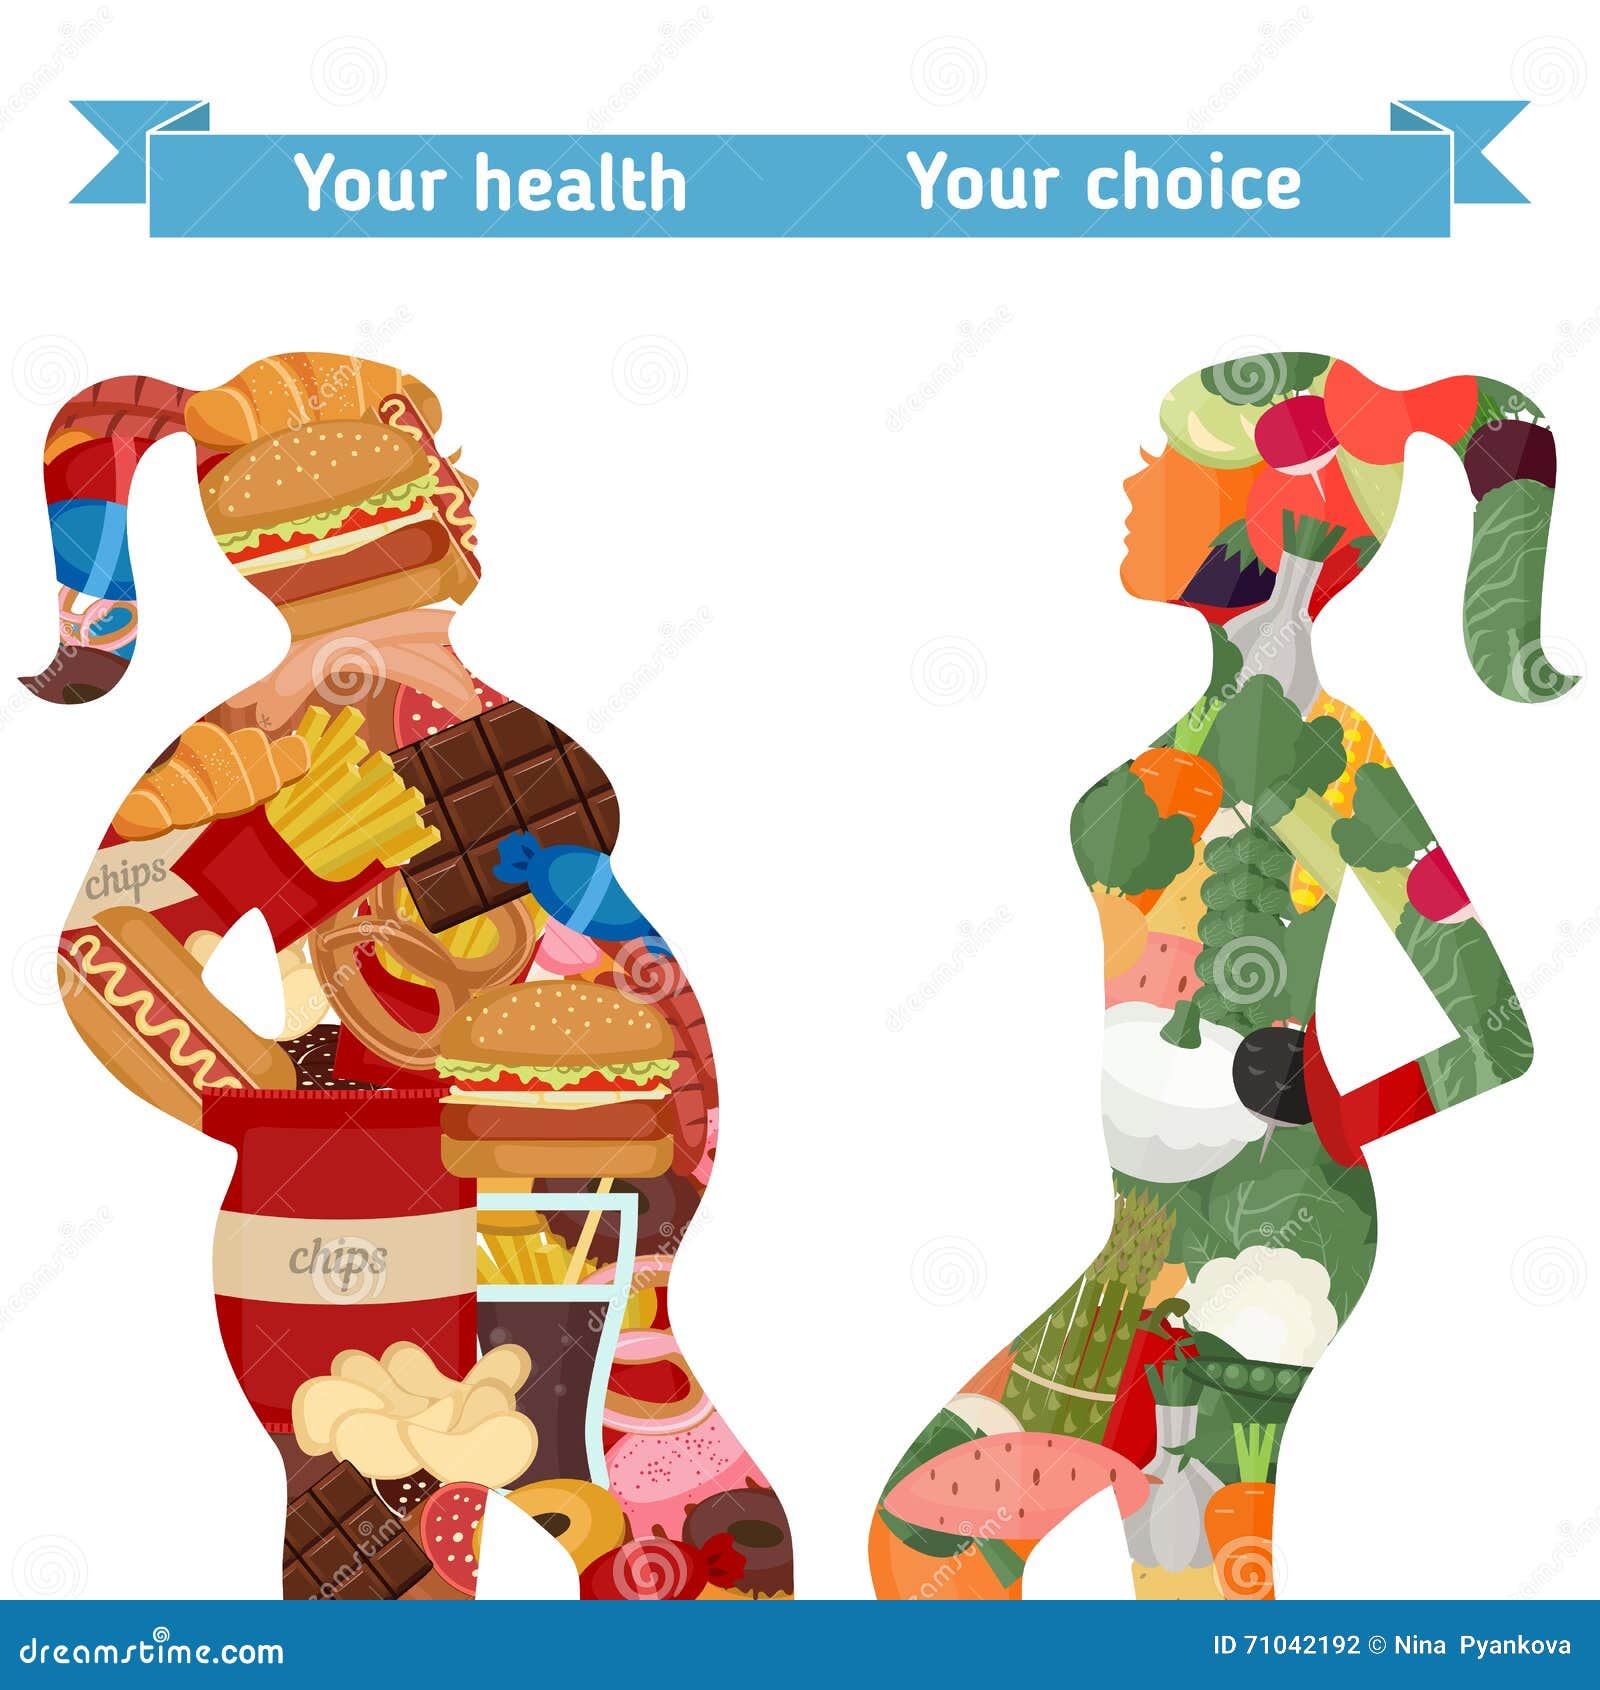 Image result for food lifestyle healthy vs unhealthy